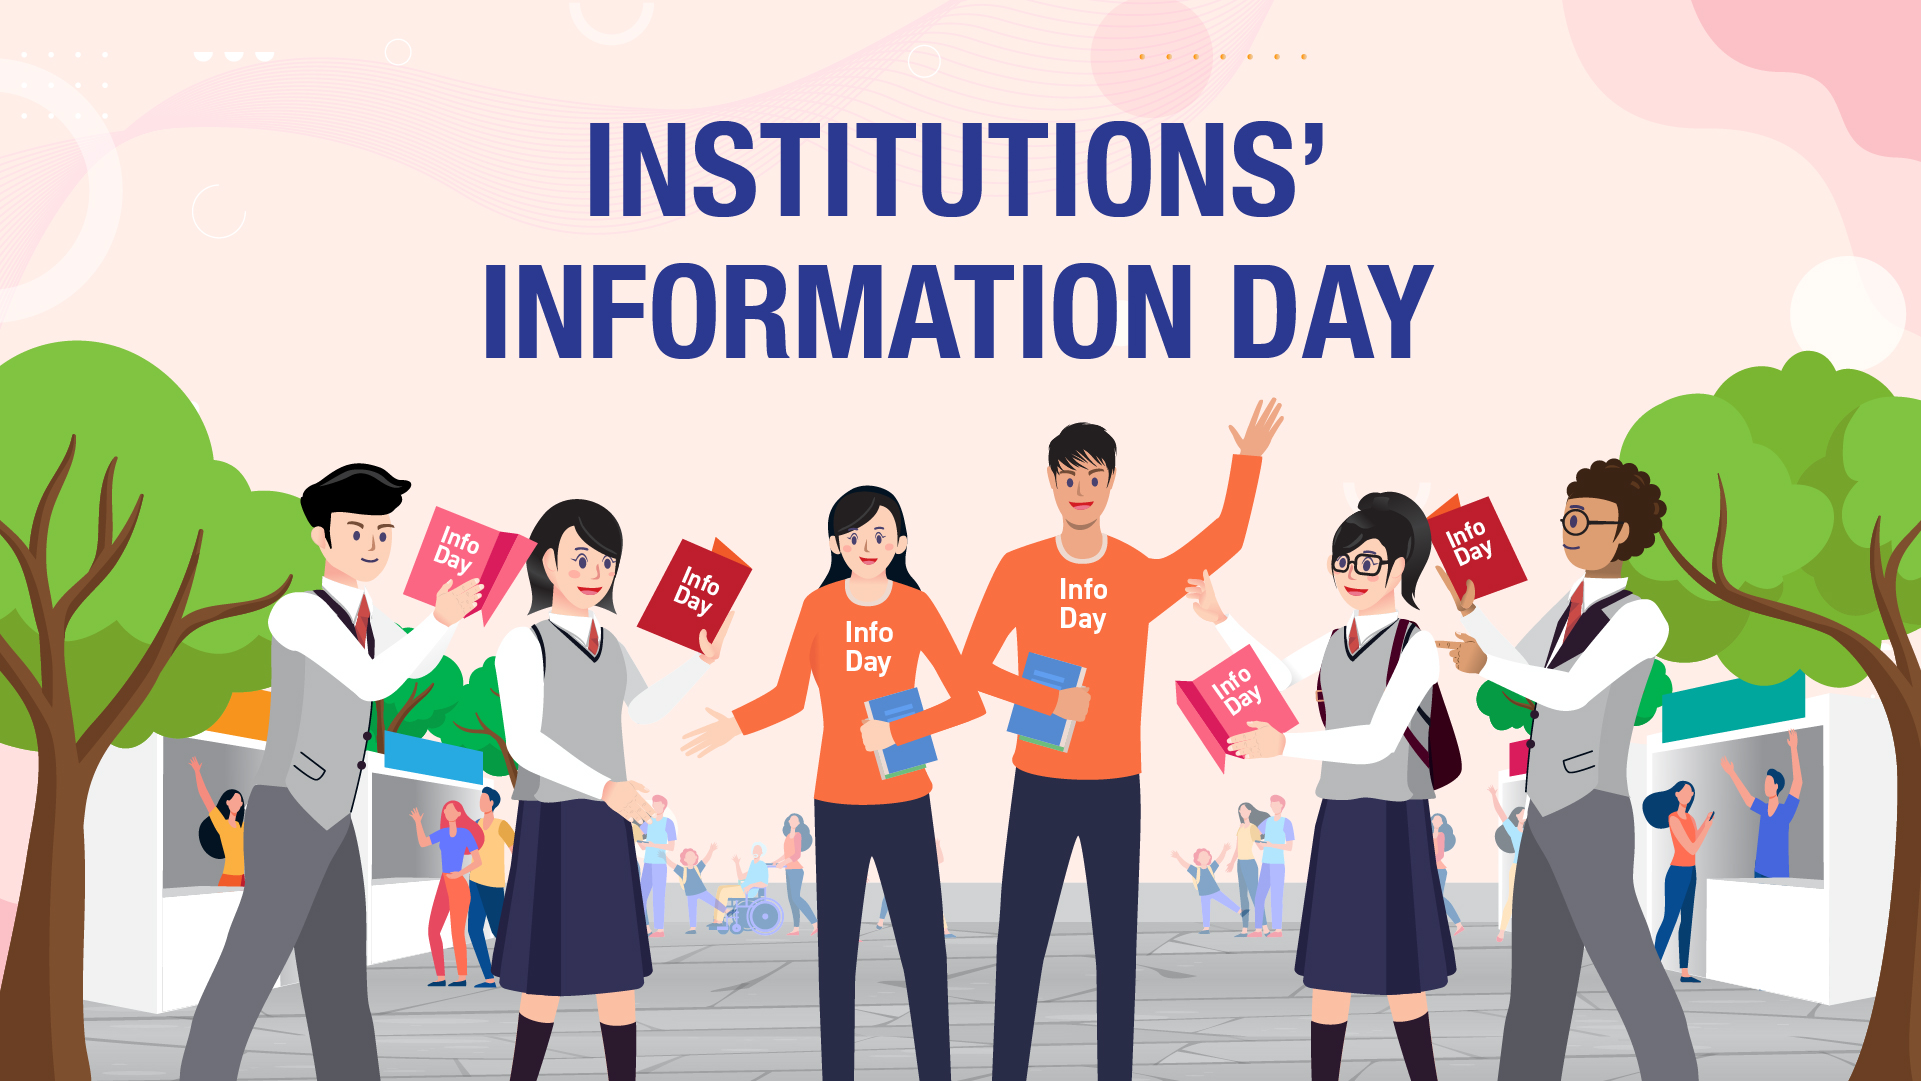 Institution's Information Day (A summary on Information Day for new admission of post-secondary institutions)